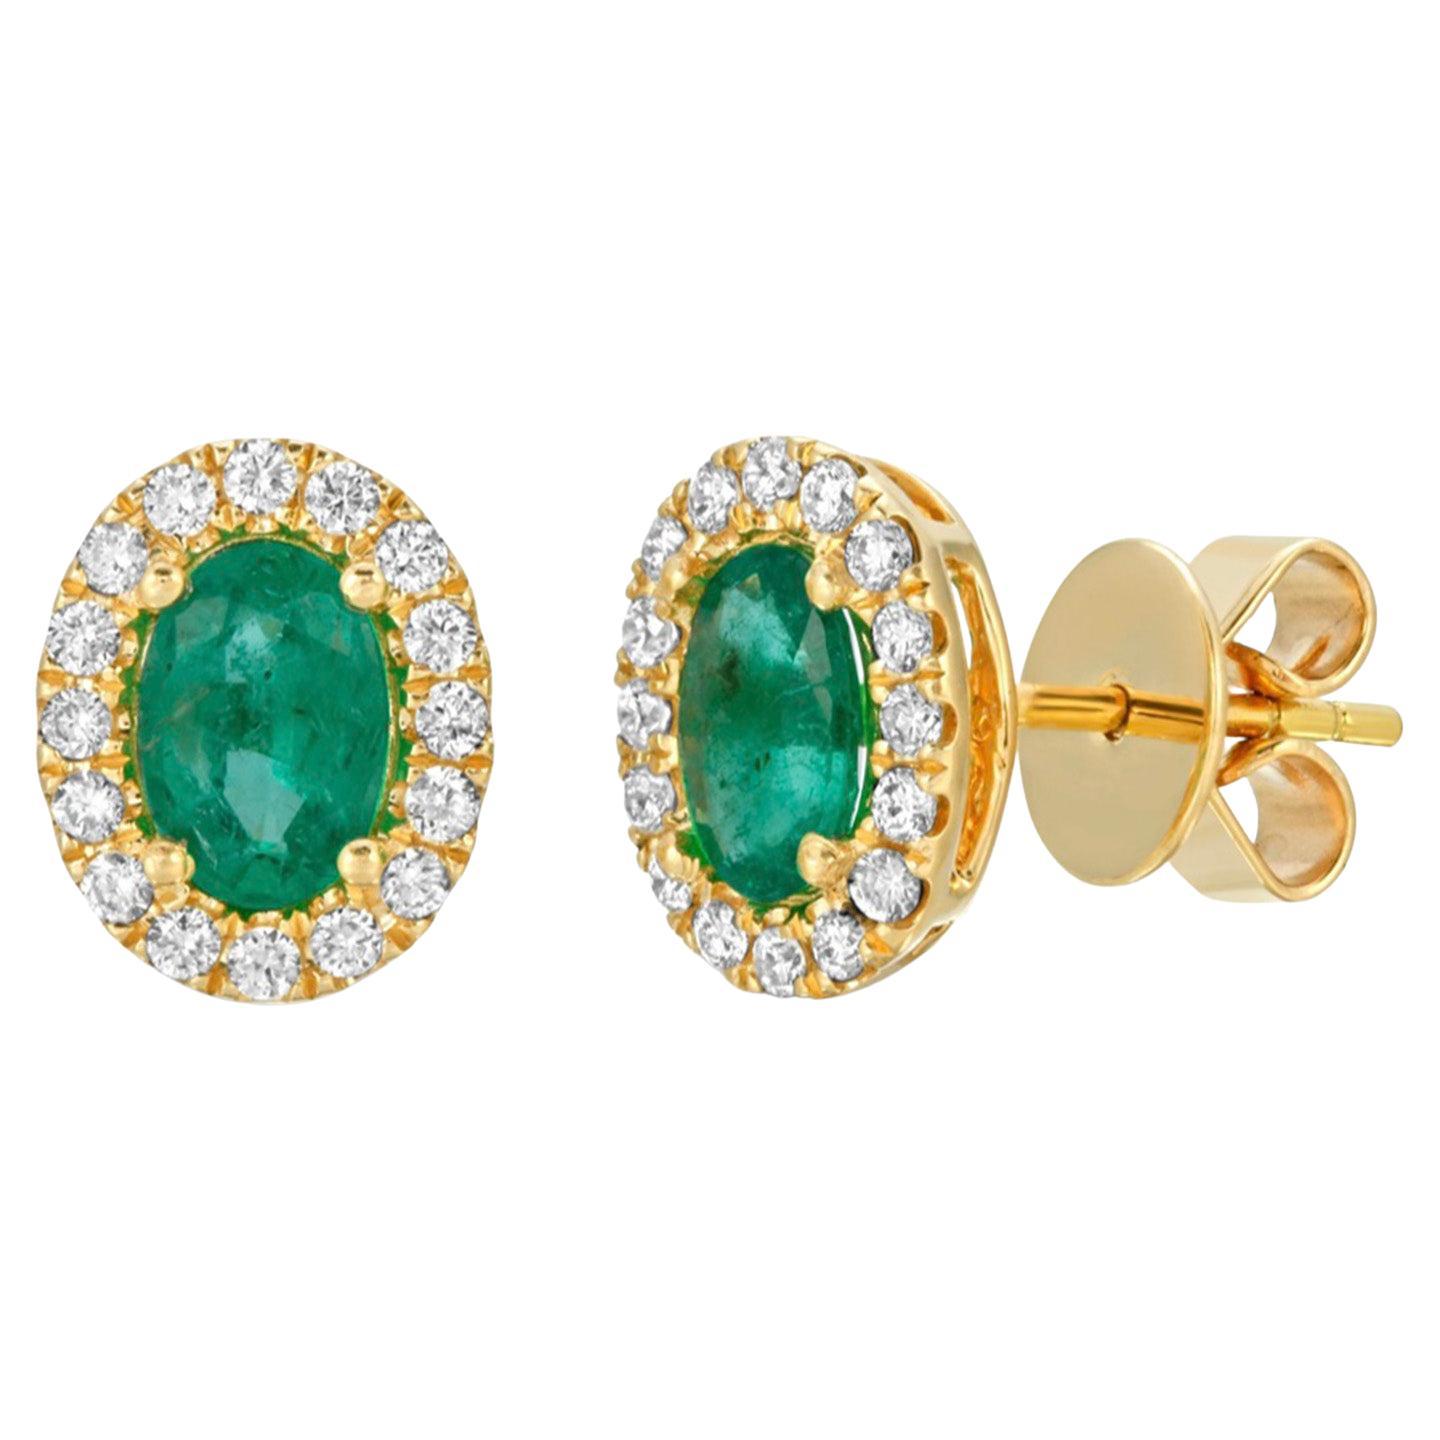 0.88 CT Colombian Emerald & 0.27 CT Diamonds in 14K Yellow Gold Stud Earrings For Sale